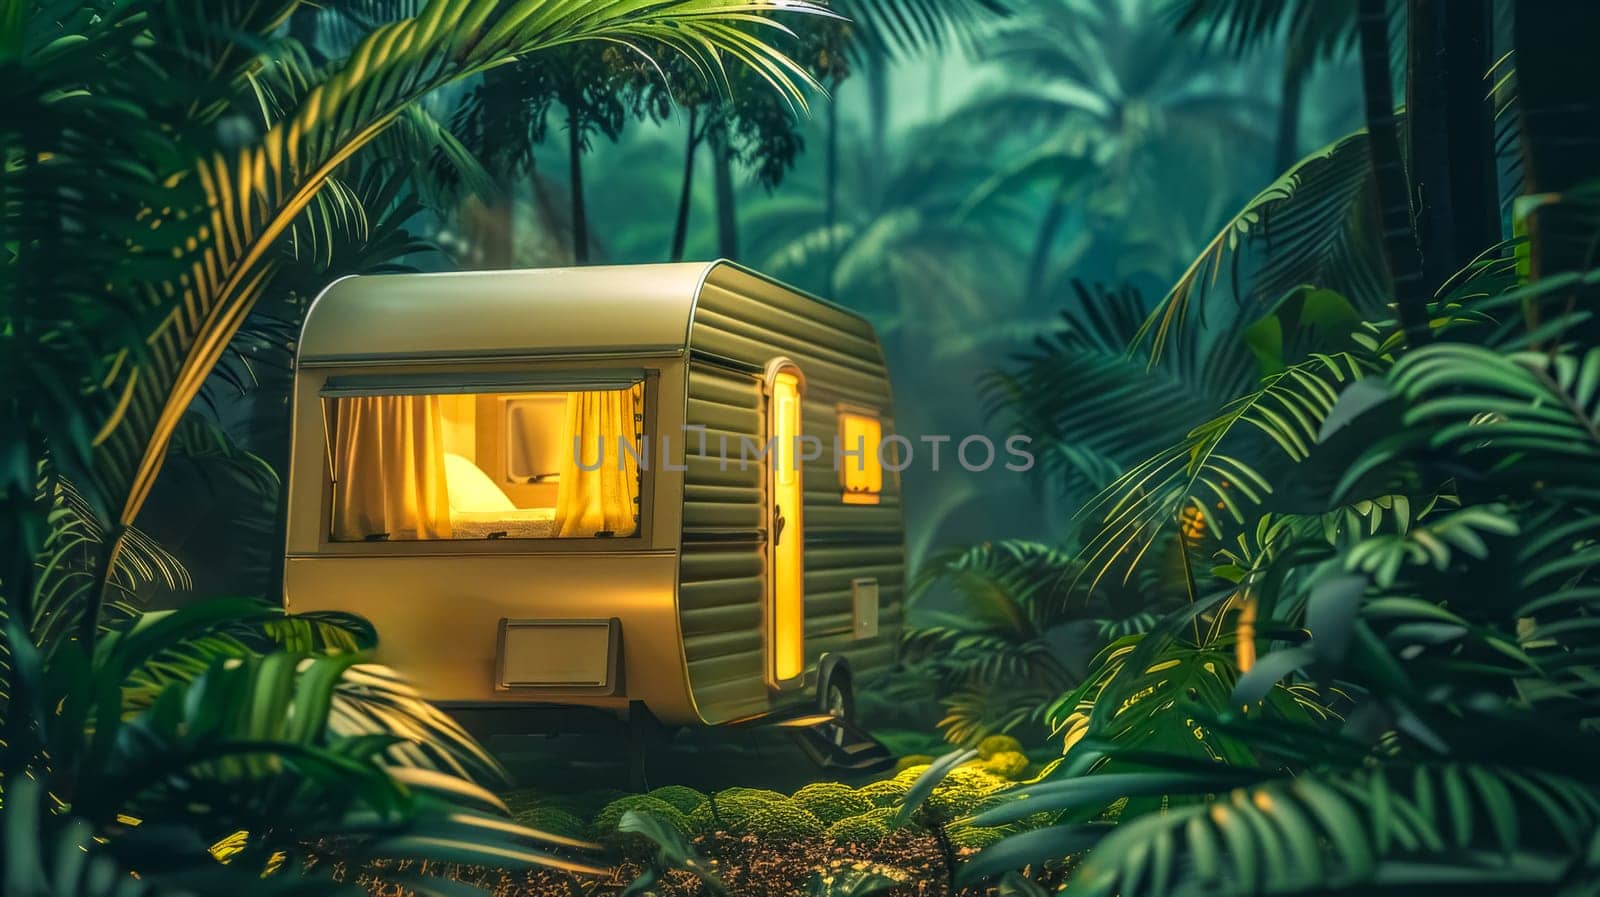 Warm light pours from a caravan nestled amid lush jungle foliage in a magical evening setting